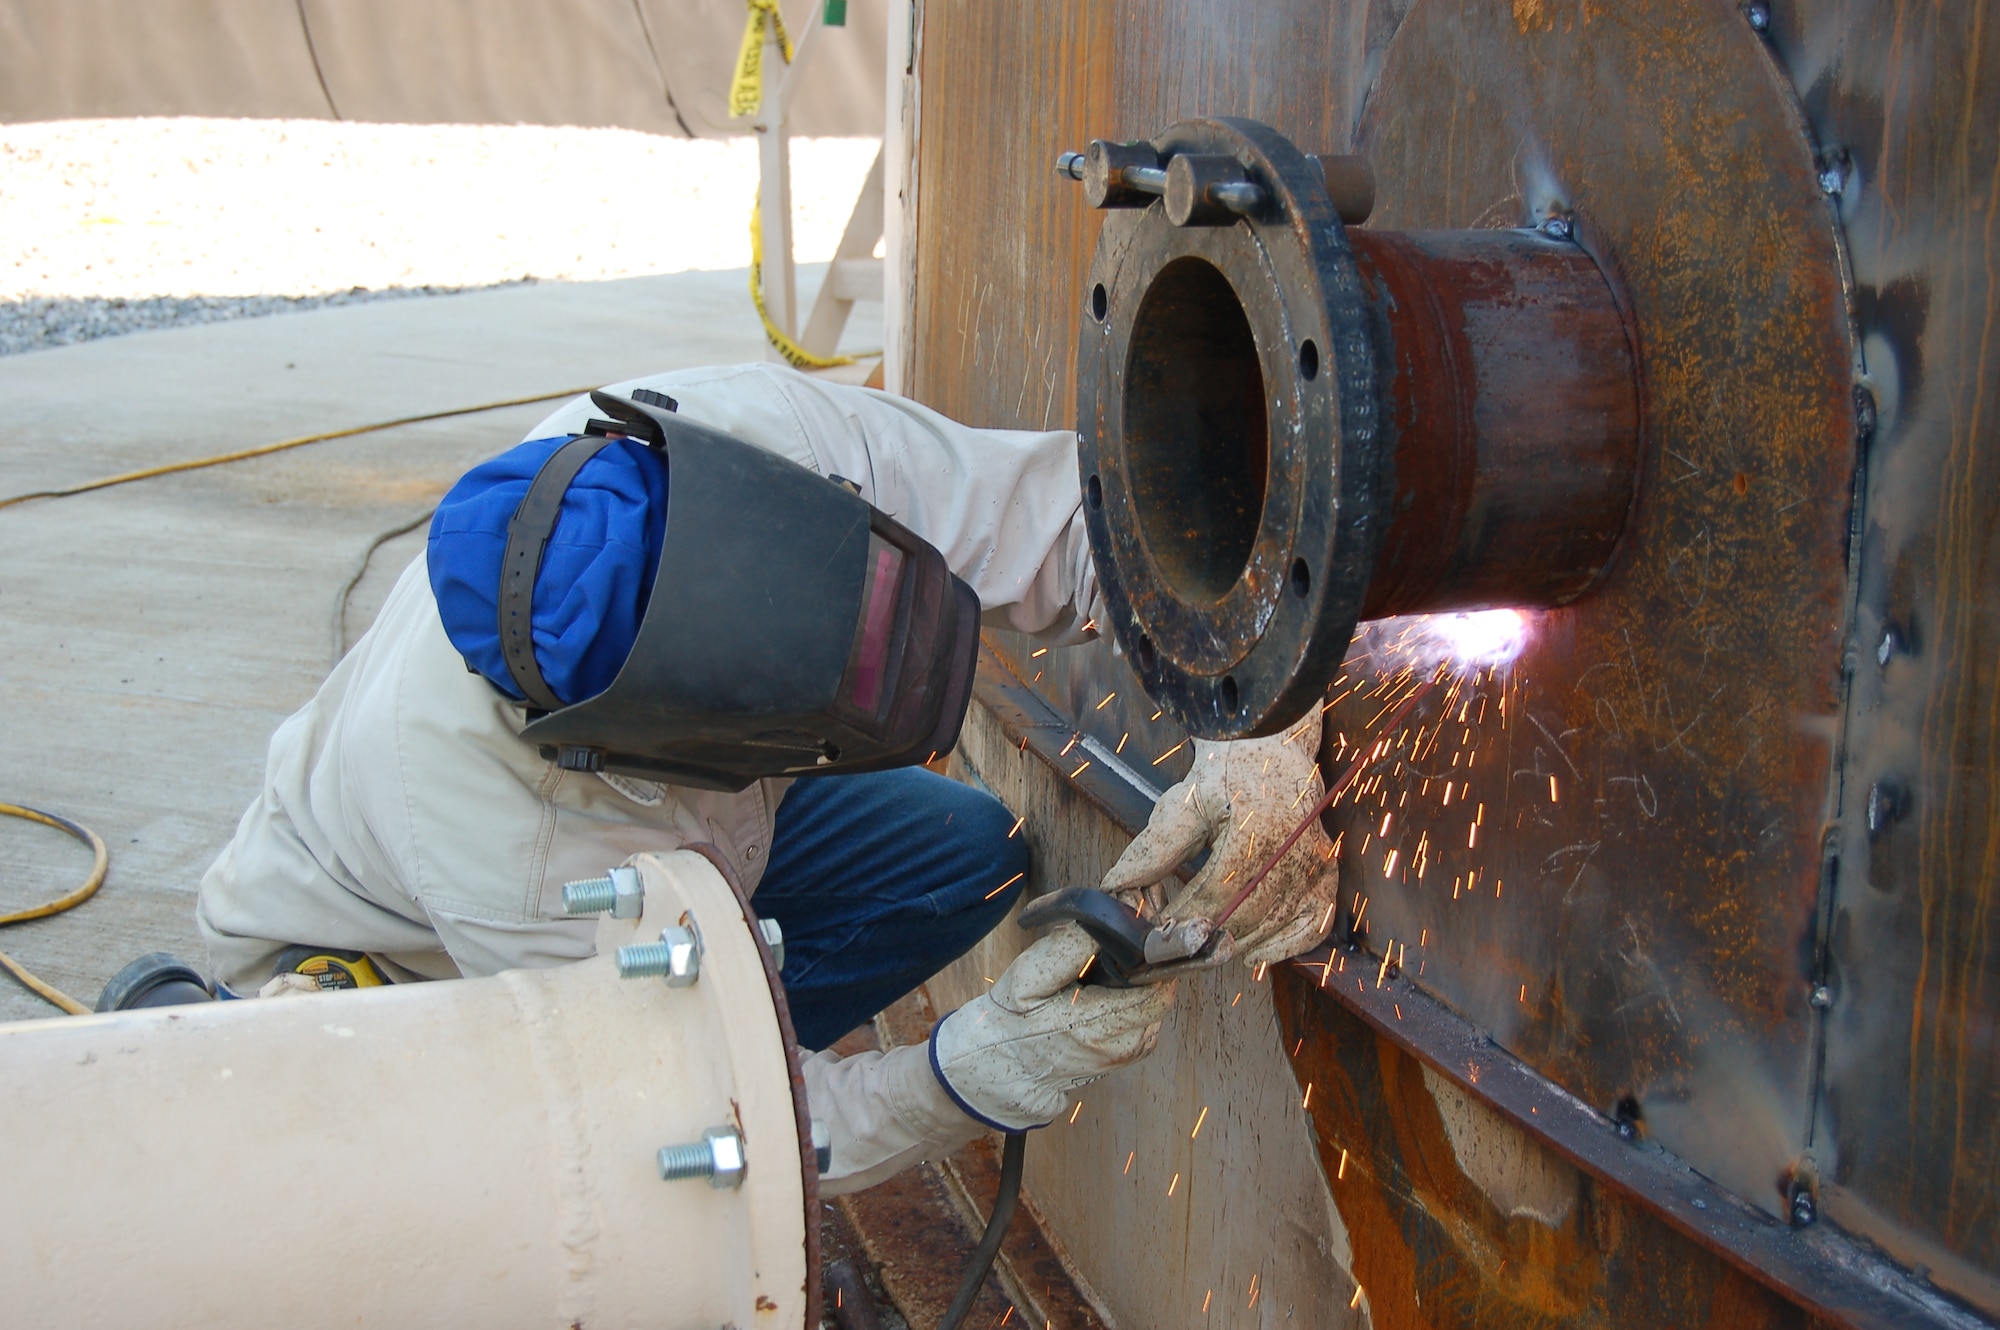 MOODY AIR FORCE BASE, Ga. -- A worker welds a supply pipe to a fuel storage tank during renovations to the bulk fuel storage facility here March 12. The upgrades are being made to improve the safety and efficiency of the facility. (U.S. Air Force photo by Tech. Sgt. Parker Gyokeres)